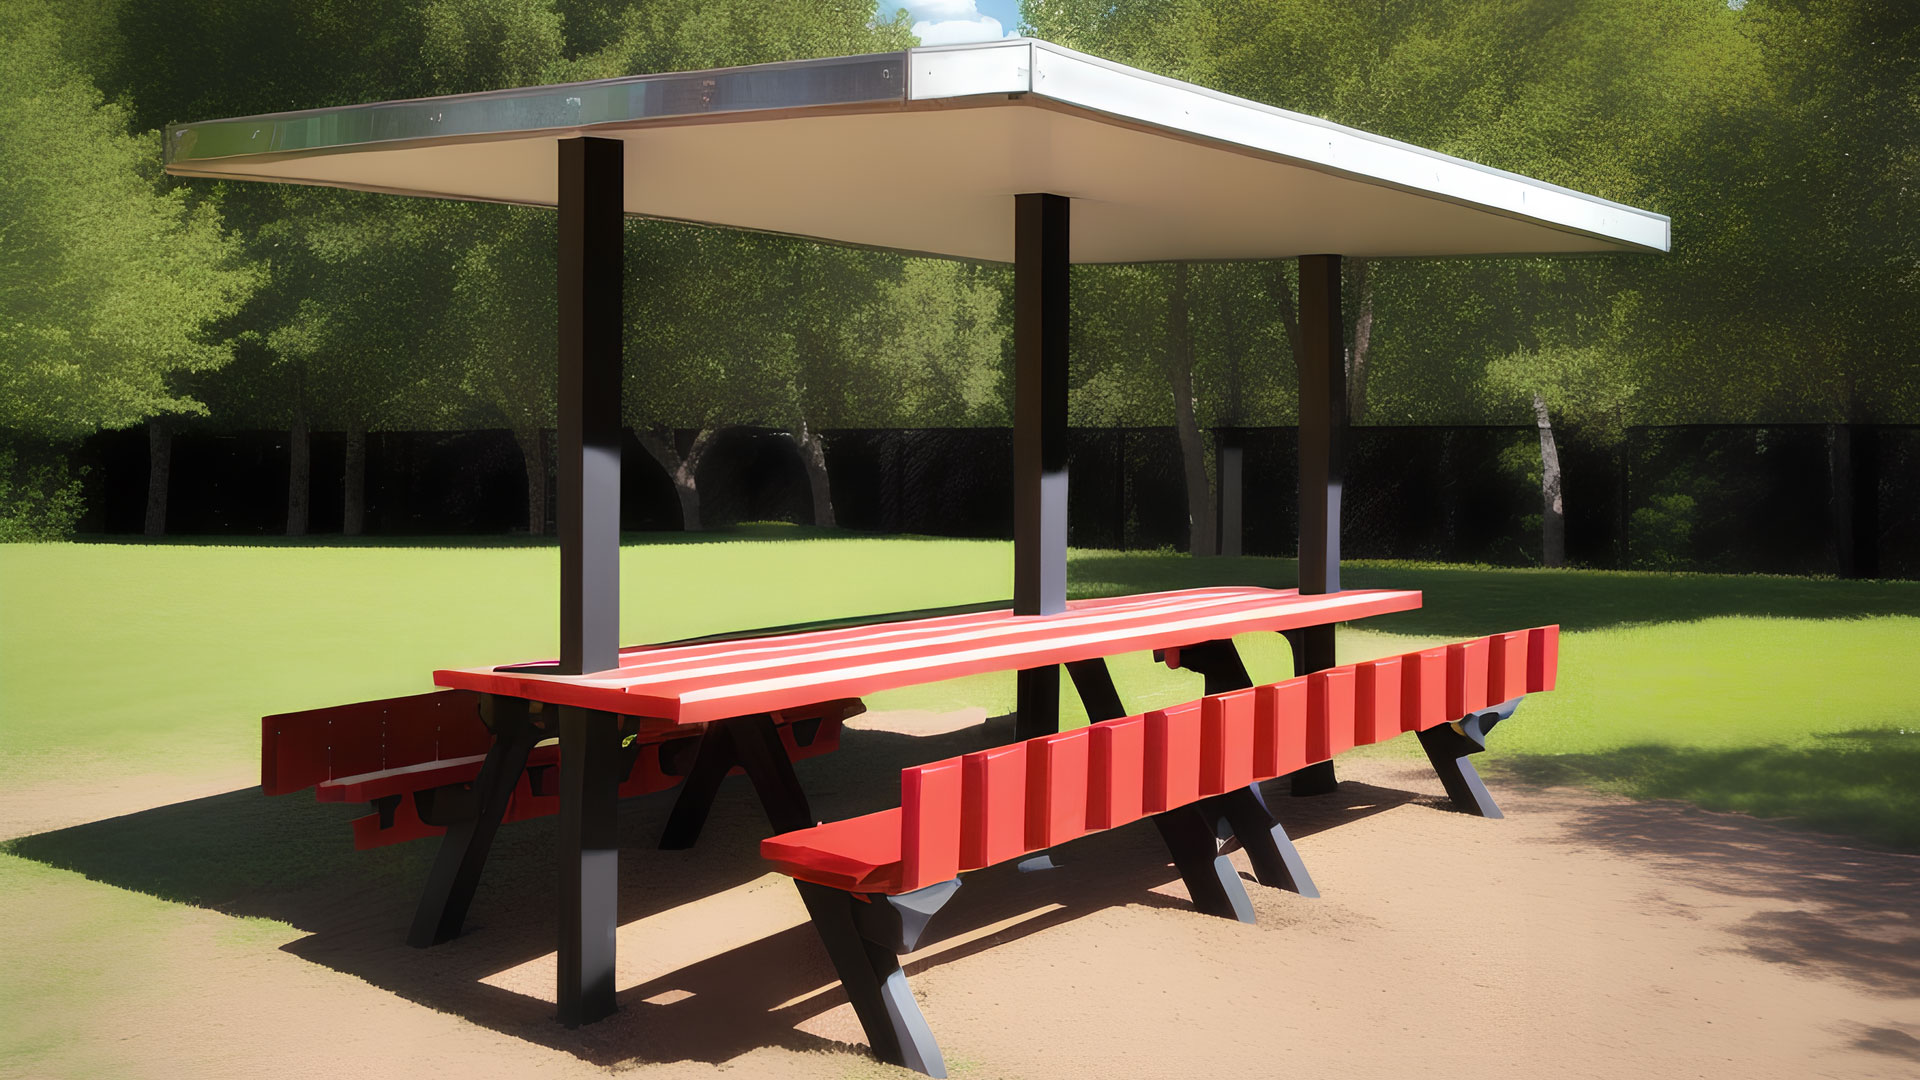 Theming of picnic tables